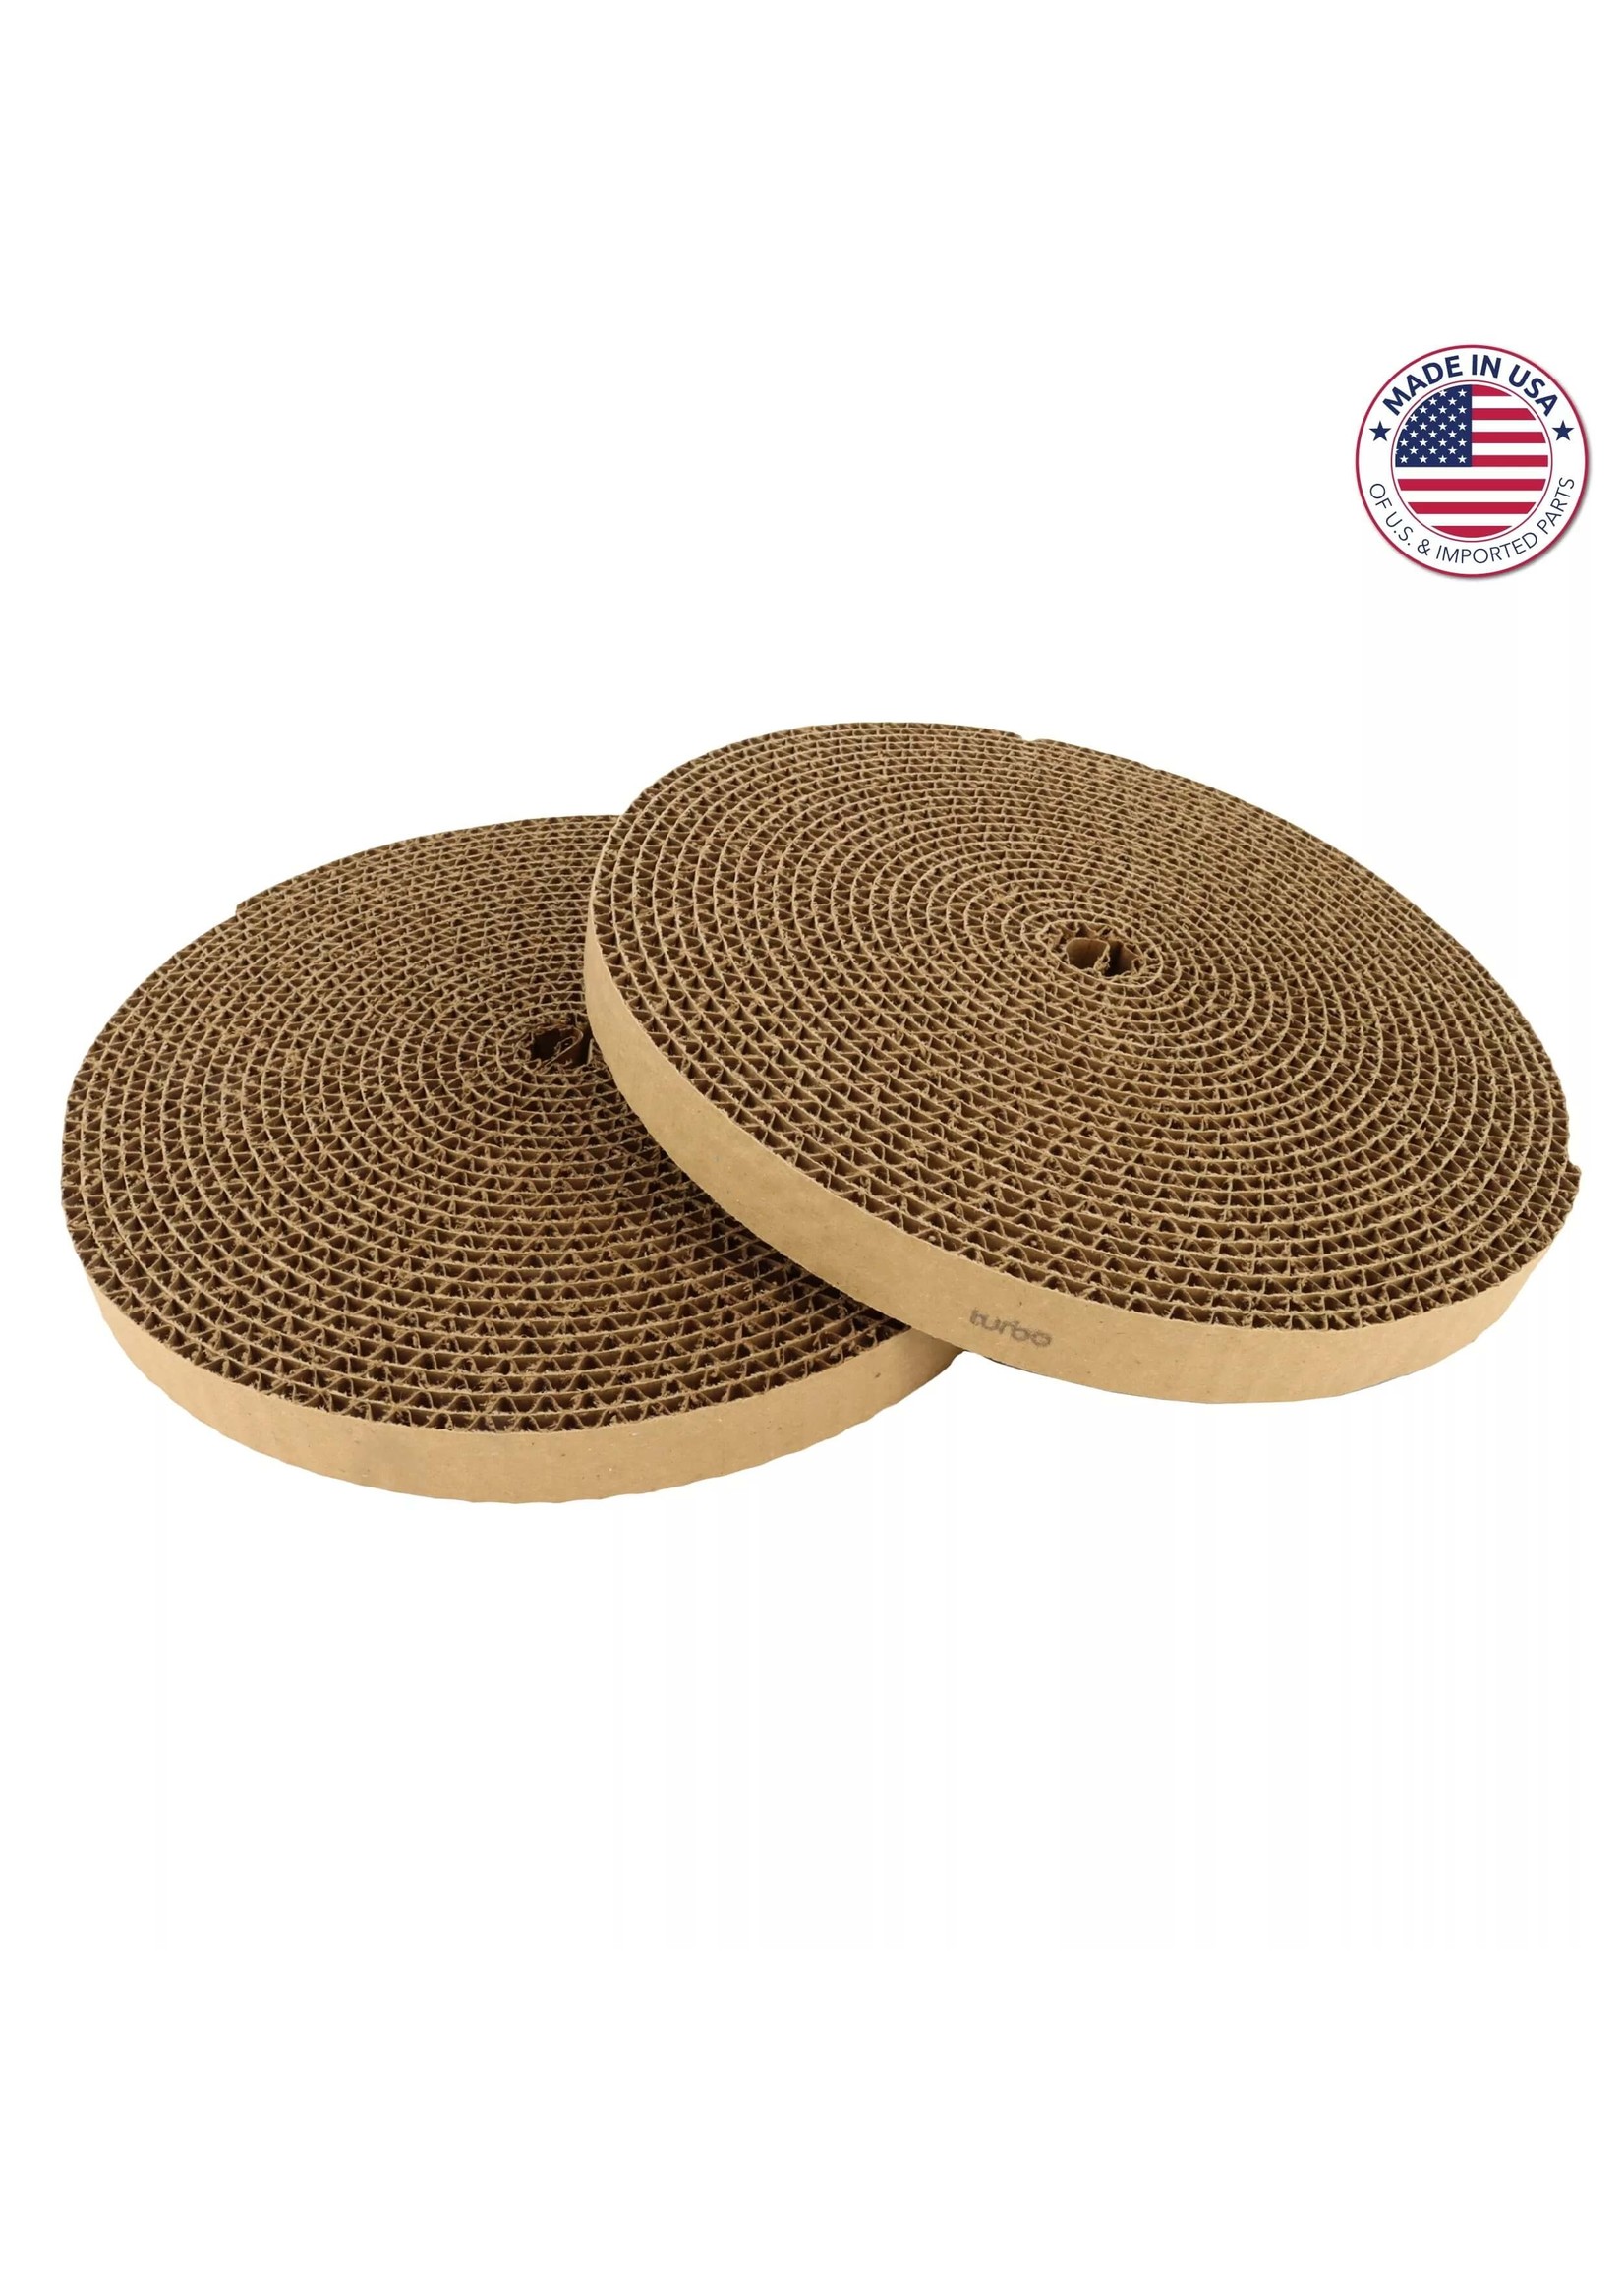 Coastal Pet Products 2 Pack Turboscratcher Replacement Pad